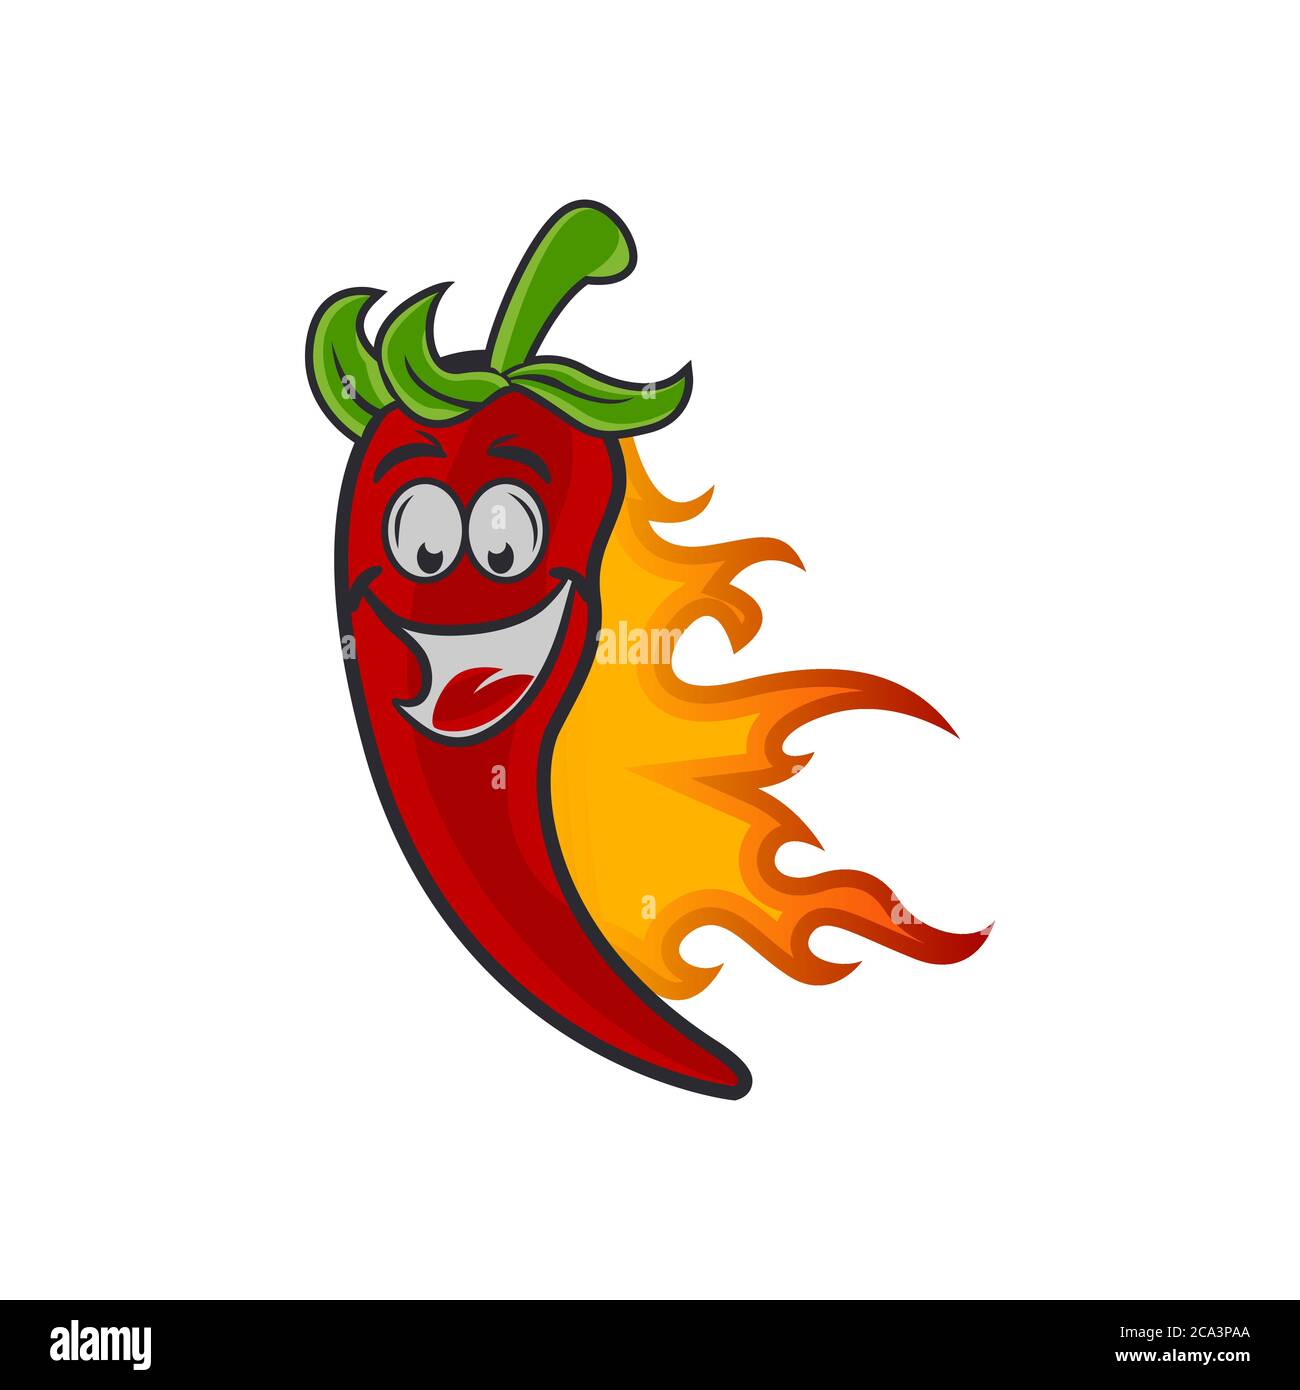 Red chili pepper cartoon mascot breathing flames vector illustration Stock Vector